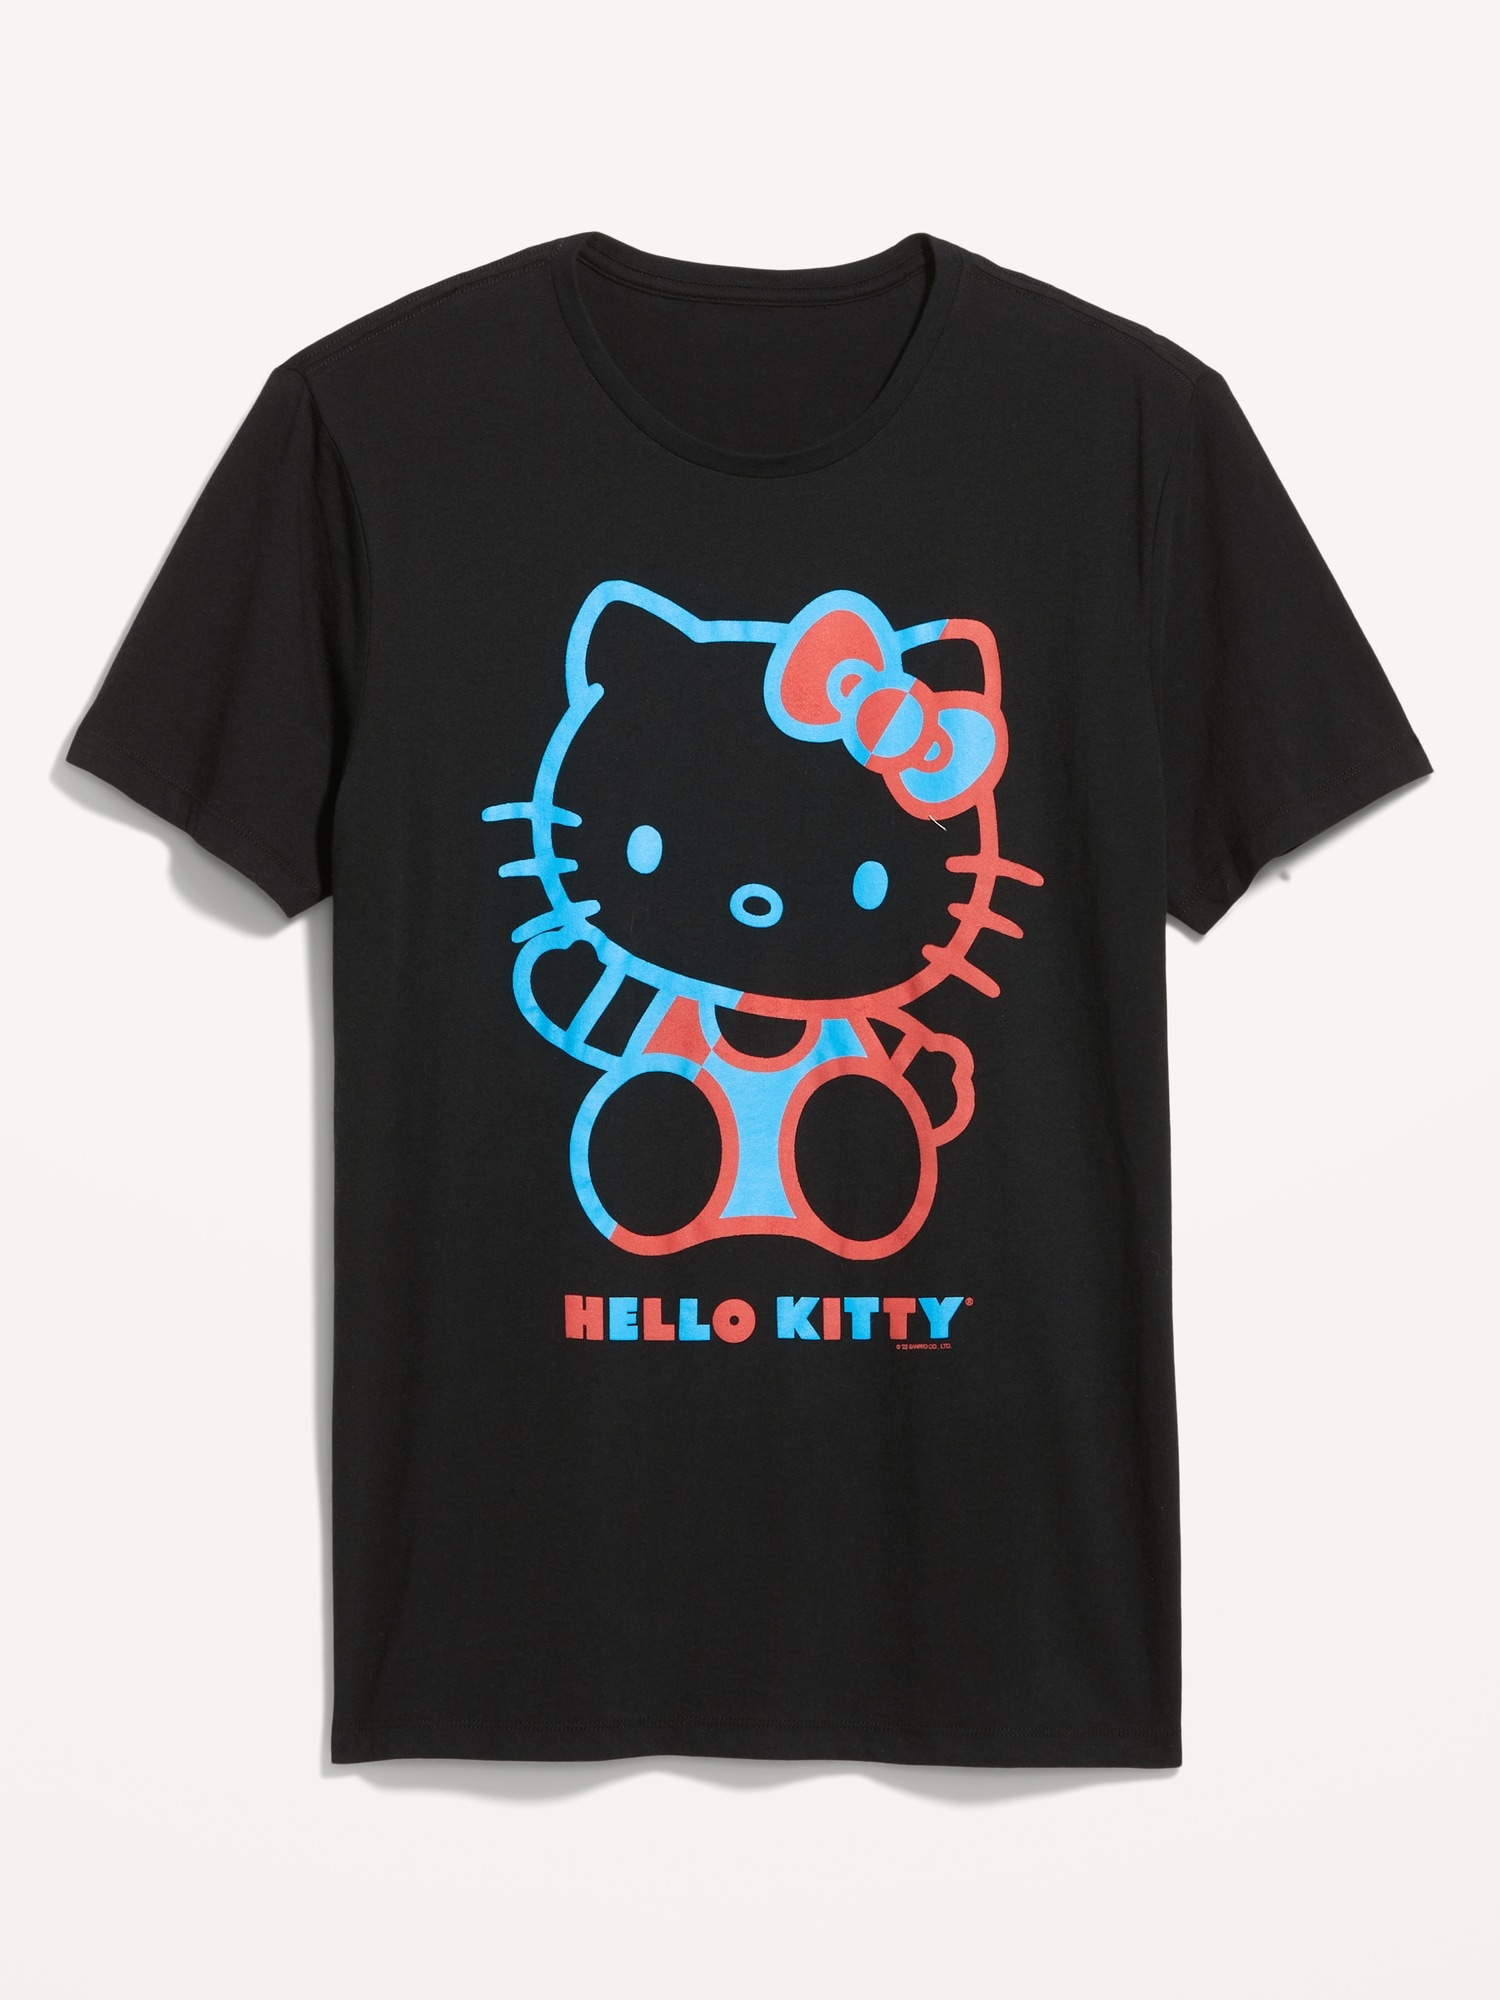 Old Navy Hello Kitty© Matching Graphic T-Shirt for Adults black. 1